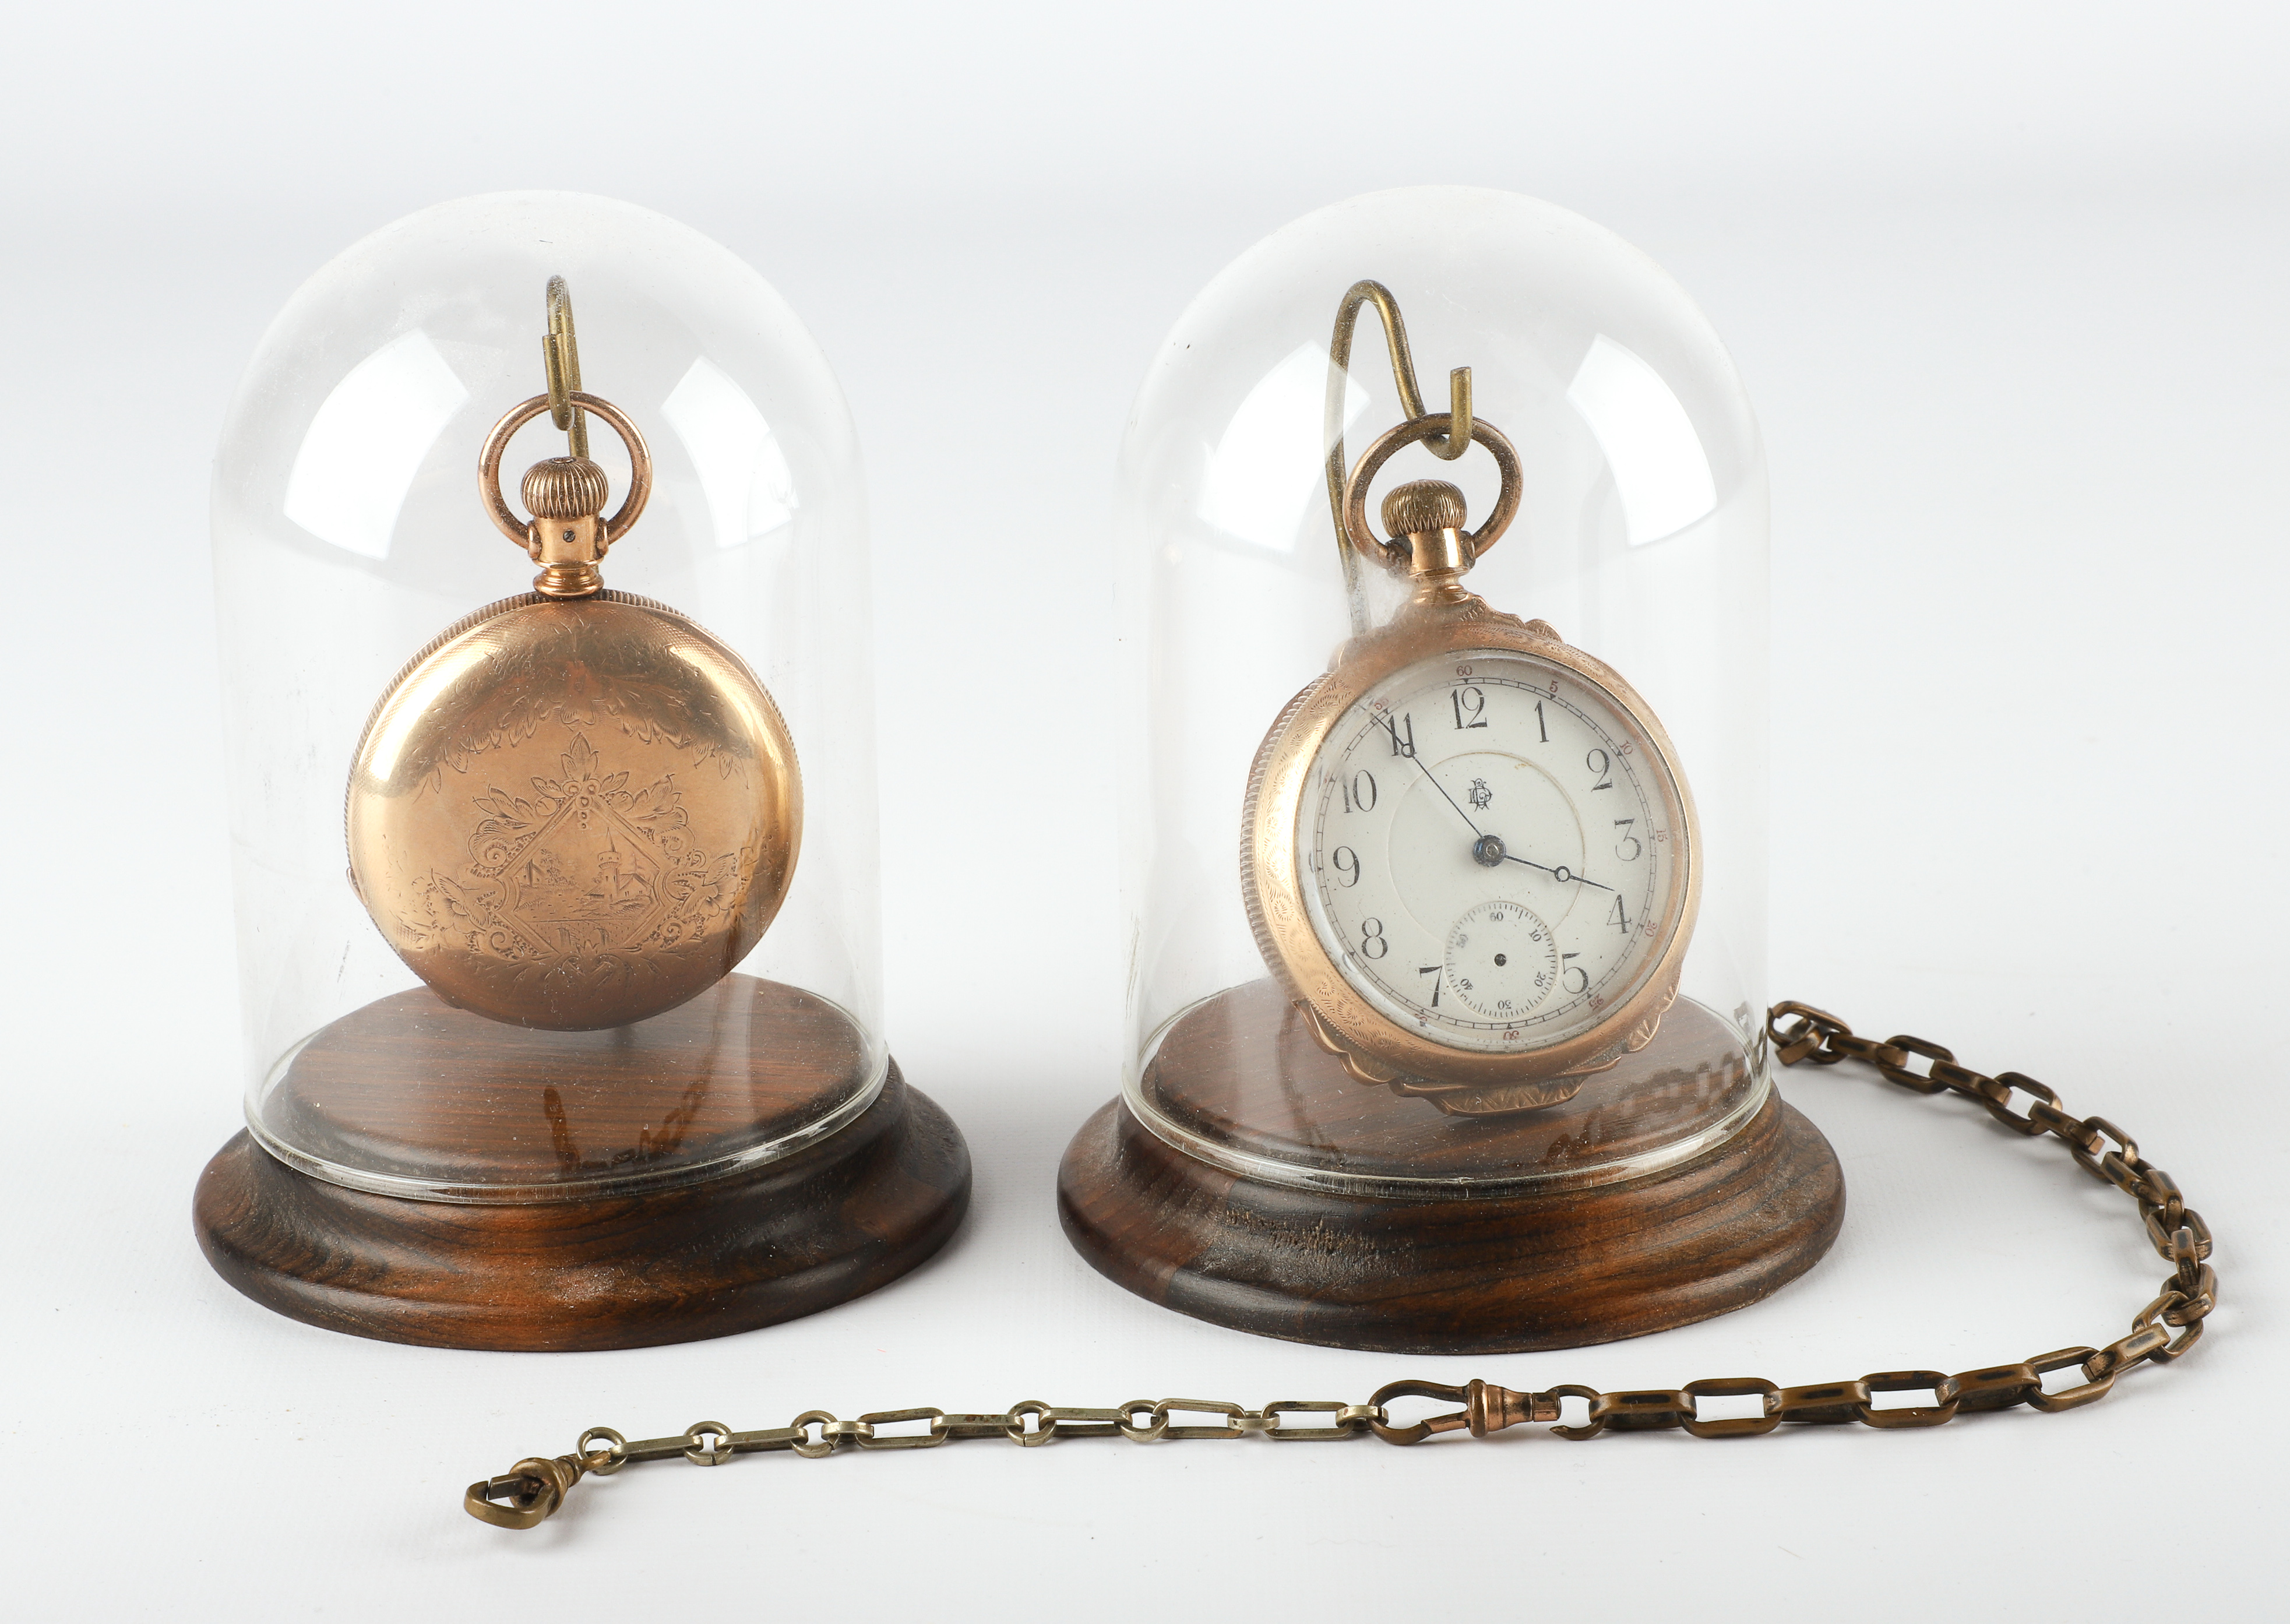  2 Gold filled pocket watches 3b110f